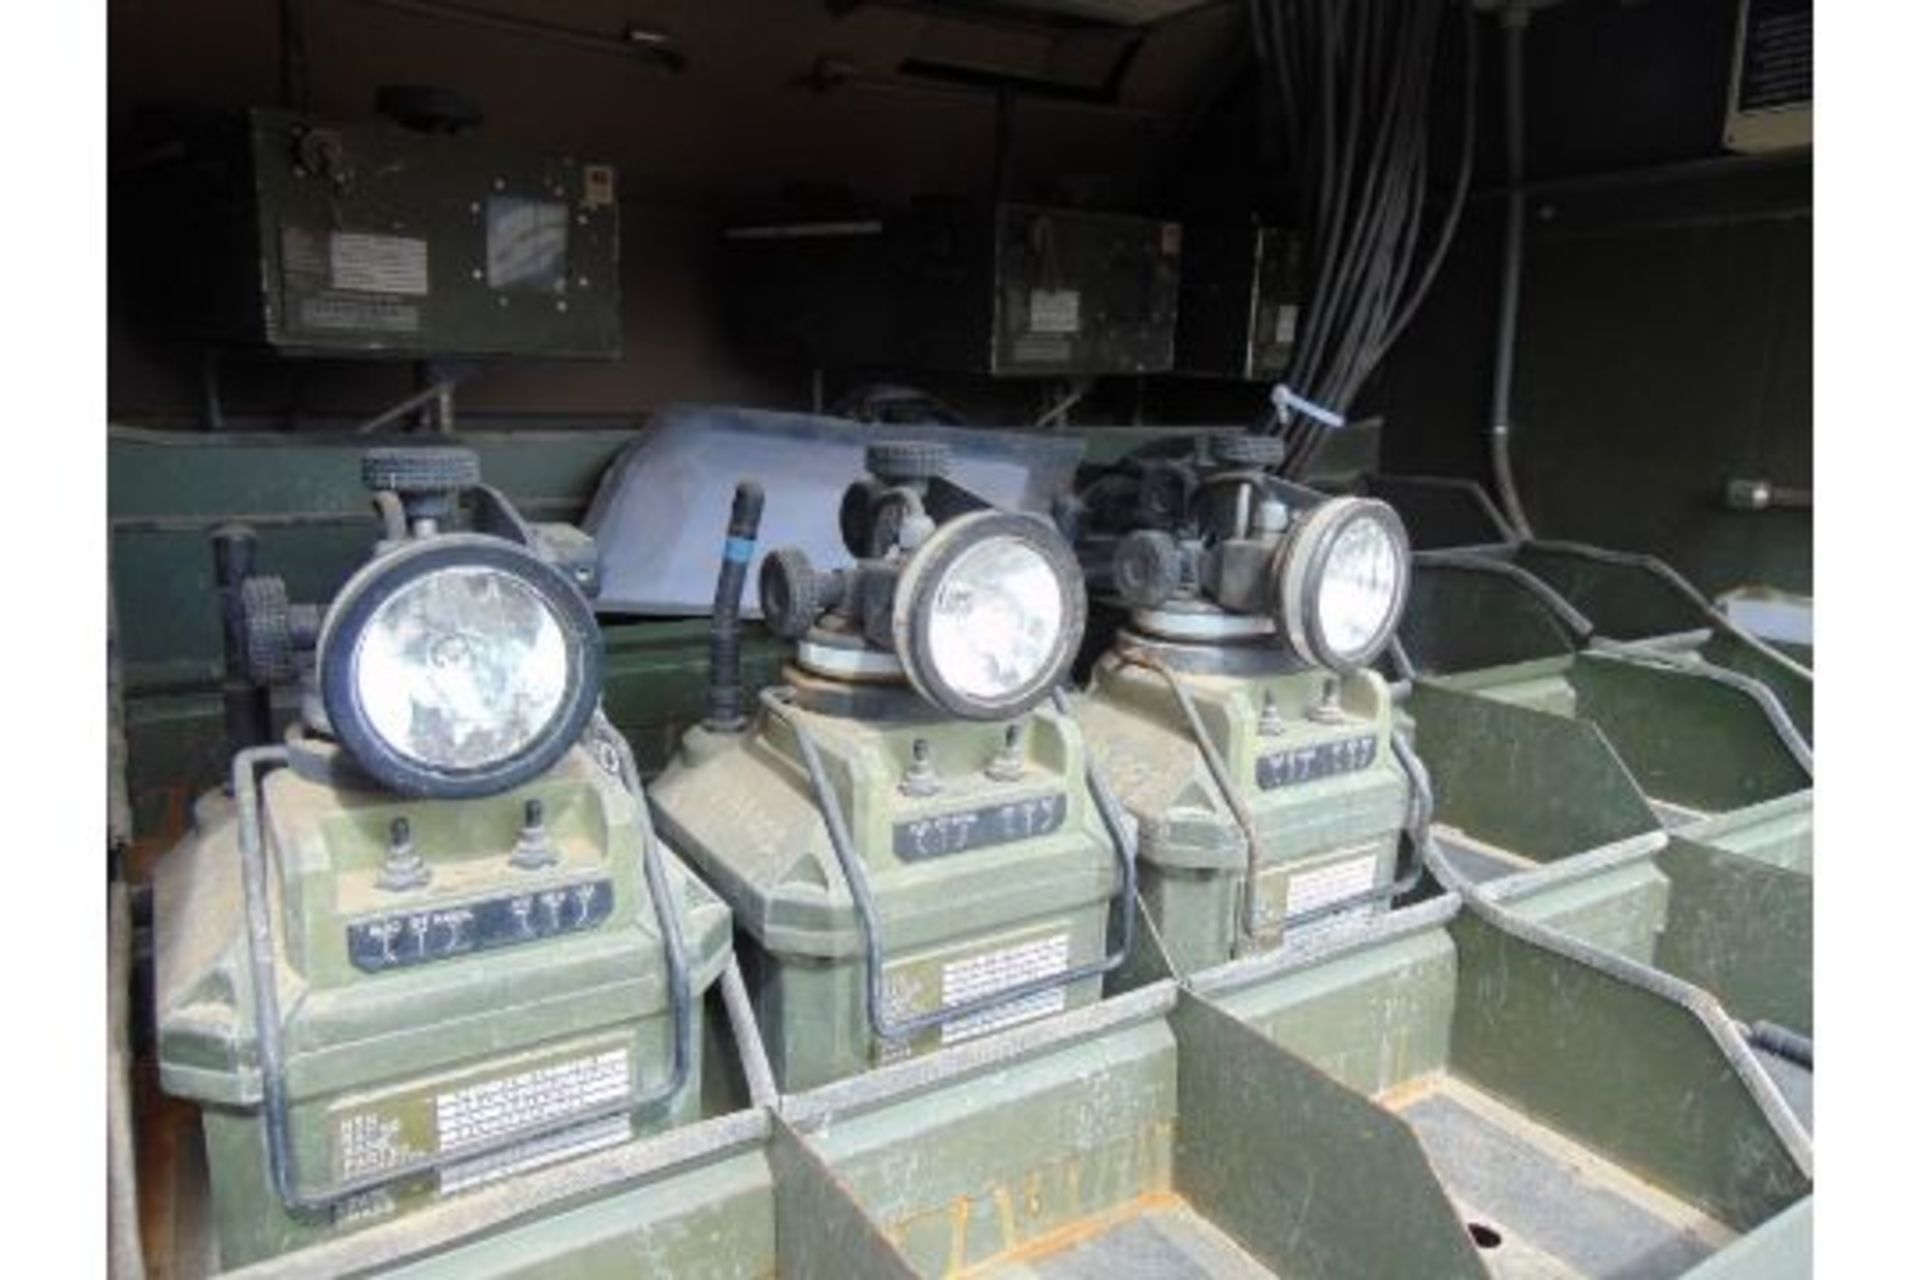 Moskit Single Axle Self Contained Airfield Lighting System c/w 2 x Onboard Generators - Image 11 of 20